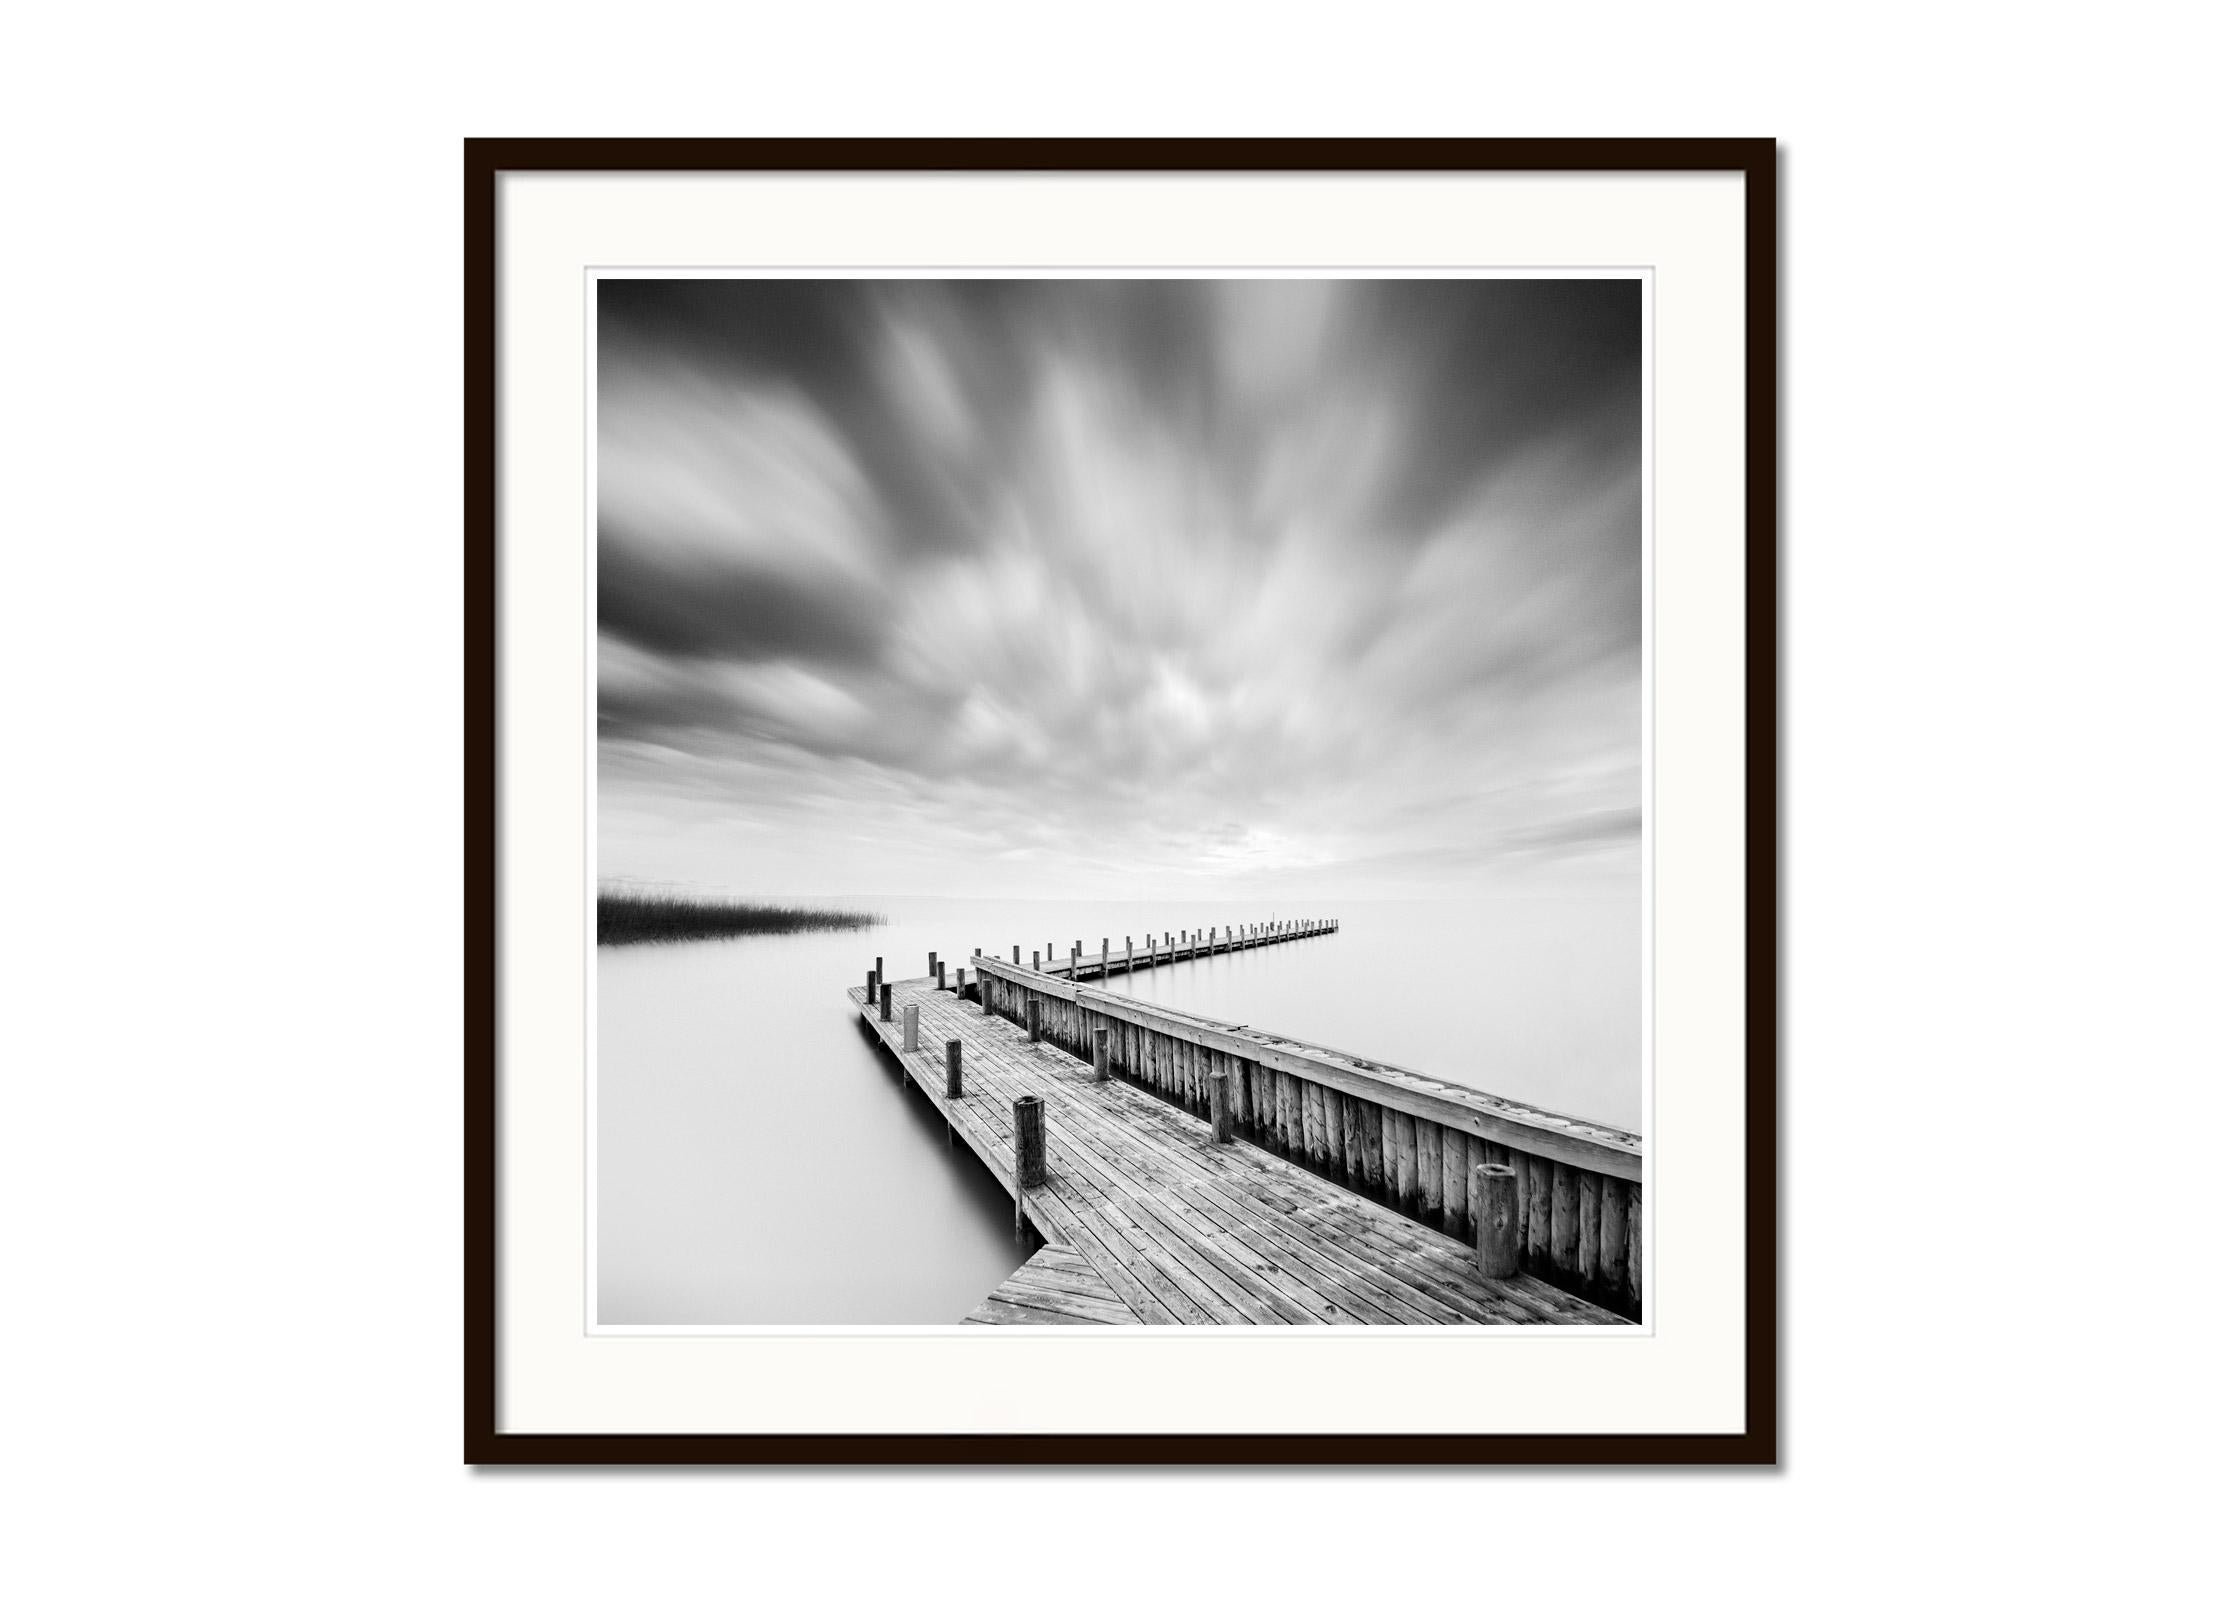 Wood Pier, lake, storm, black & white long exposure art waterscape photography - Gray Landscape Photograph by Gerald Berghammer